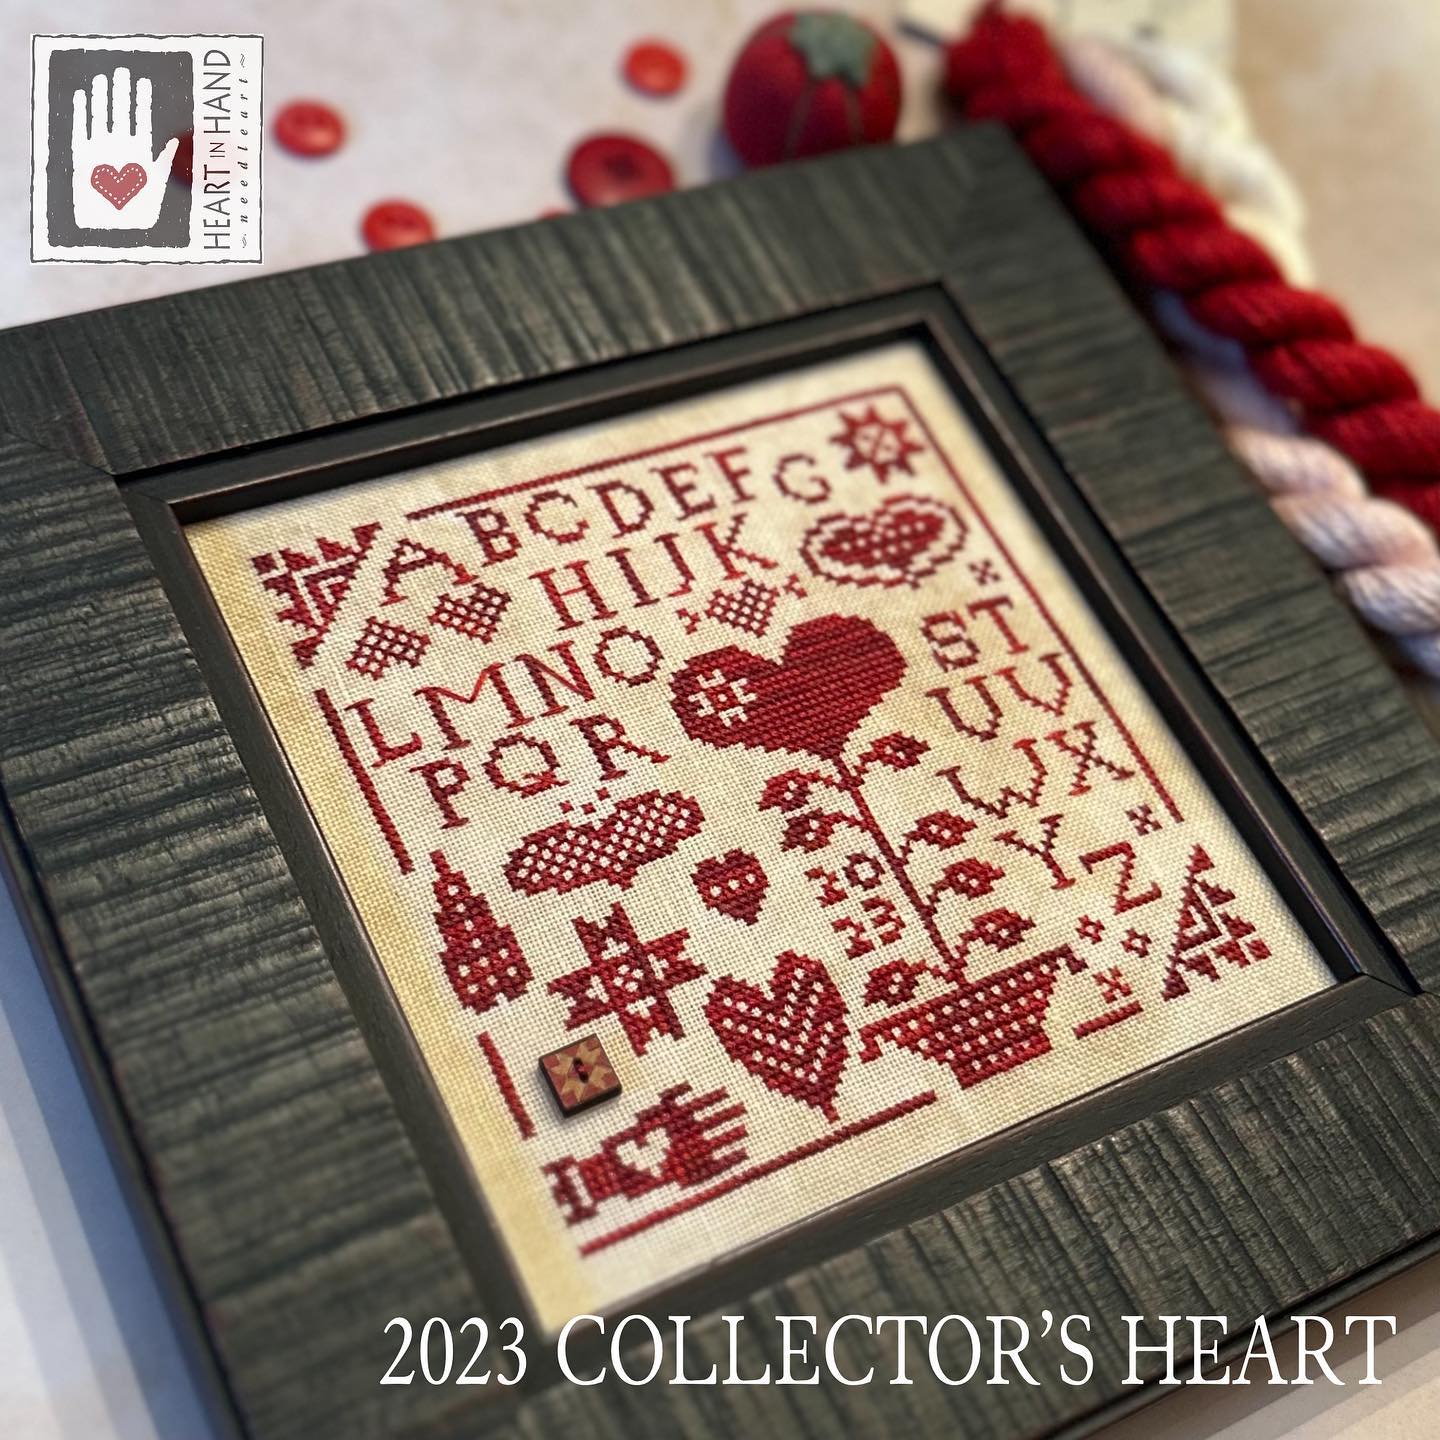 Heart in Hand Needleart - 2023 Collector's Heart Kit-Heart in Hand Needleart - 2023 Collectors Heart Kit, monotone, reds, sampler, hearts, cross stitch